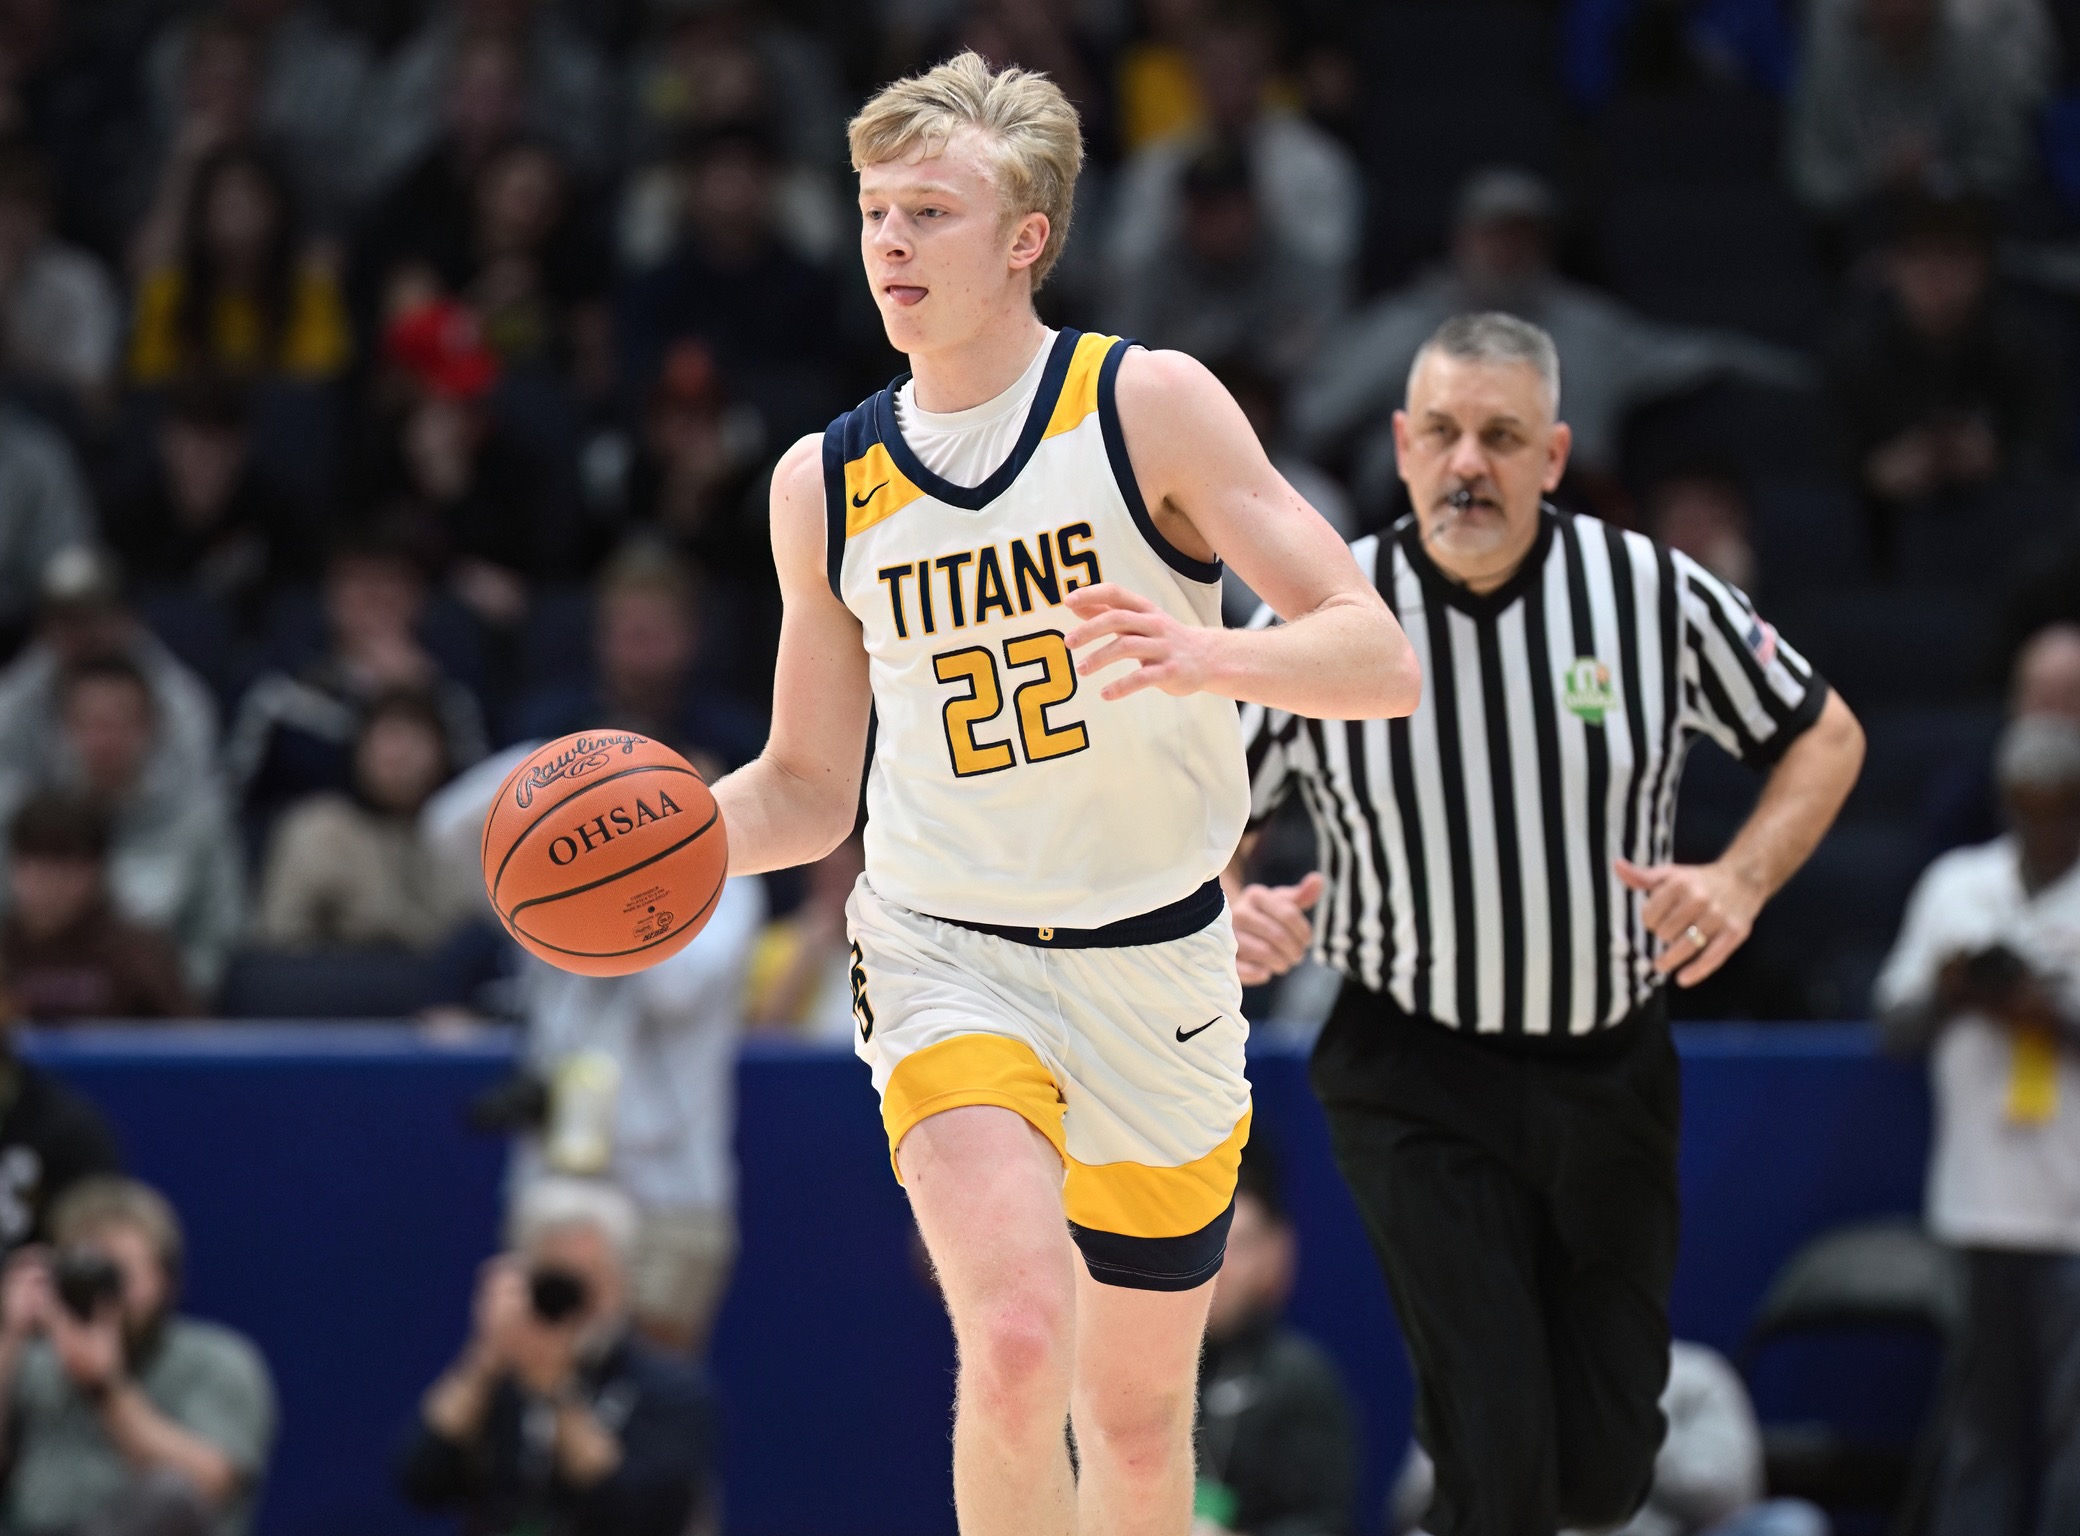 Ottawa-Glandorf's Colin White brings the ball up the floor in the 2023 Division III state championship game.